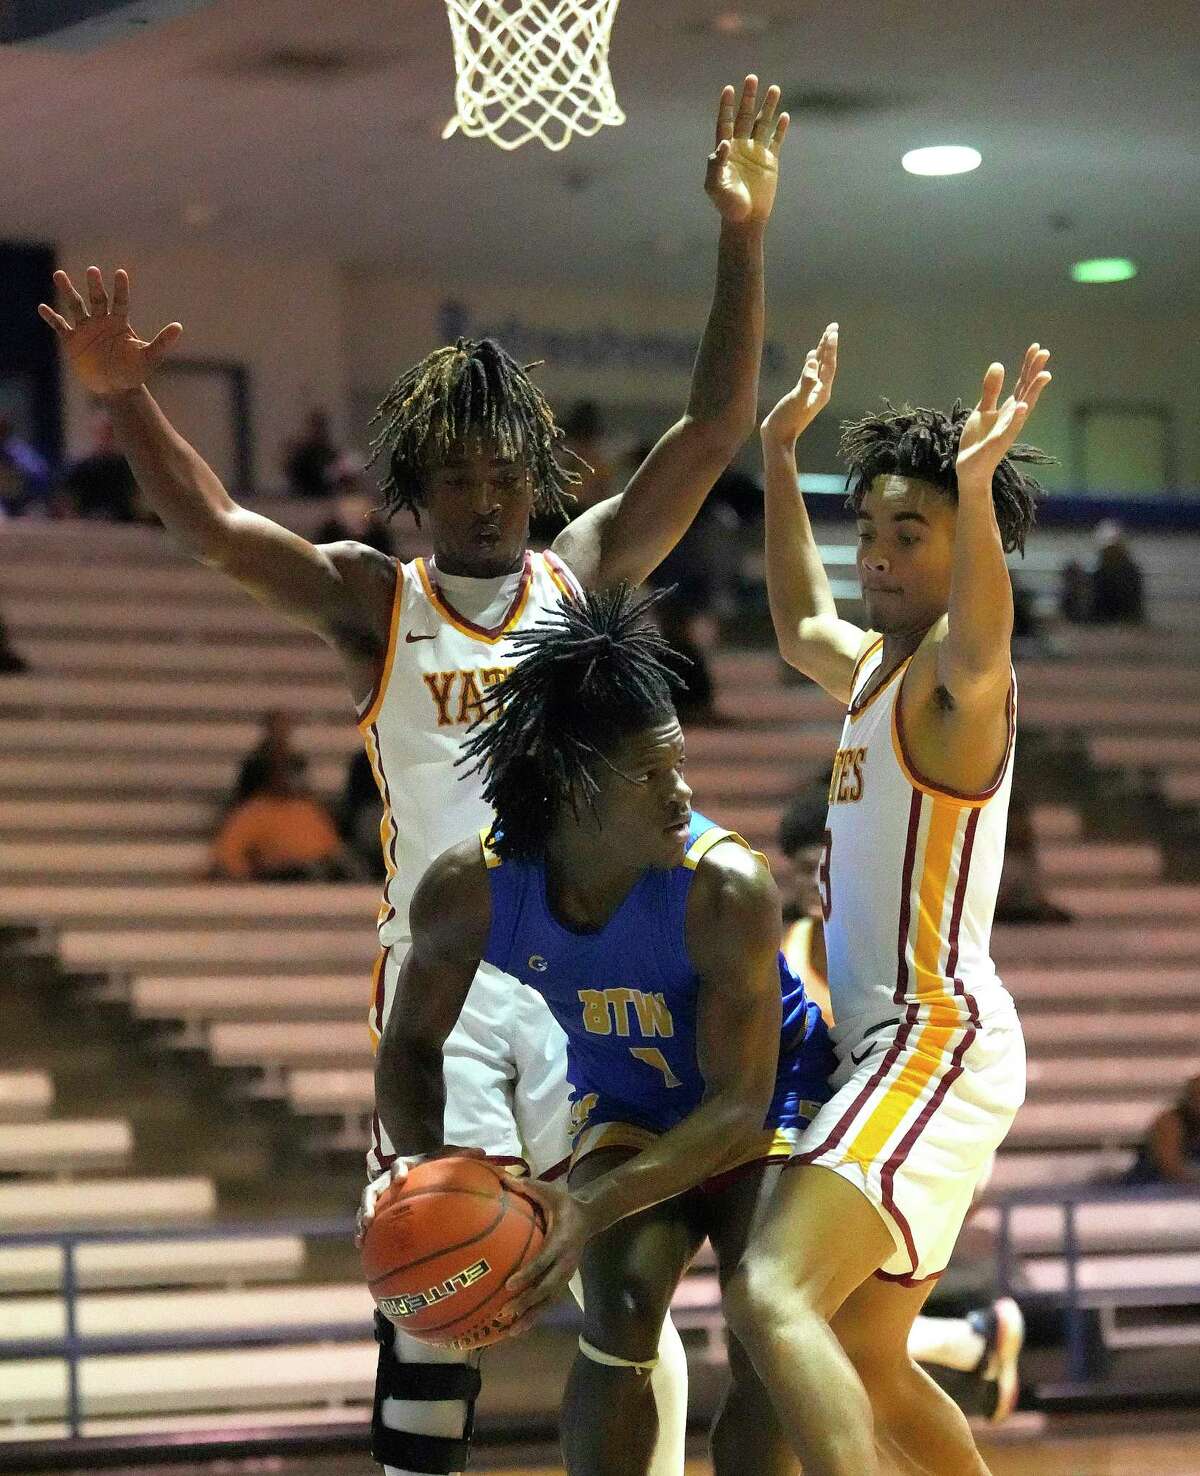 Washington’s Andre Walker (1) looks to pass the ball between Yates Broderick Brown (1) and Calvin Murphy (3) during the second half of a high school District 21-4A boys basketball game at Barnett Fieldhouse on Friday, Dec. 9, 2022 in Houston. Washington beat Yates 101-49.